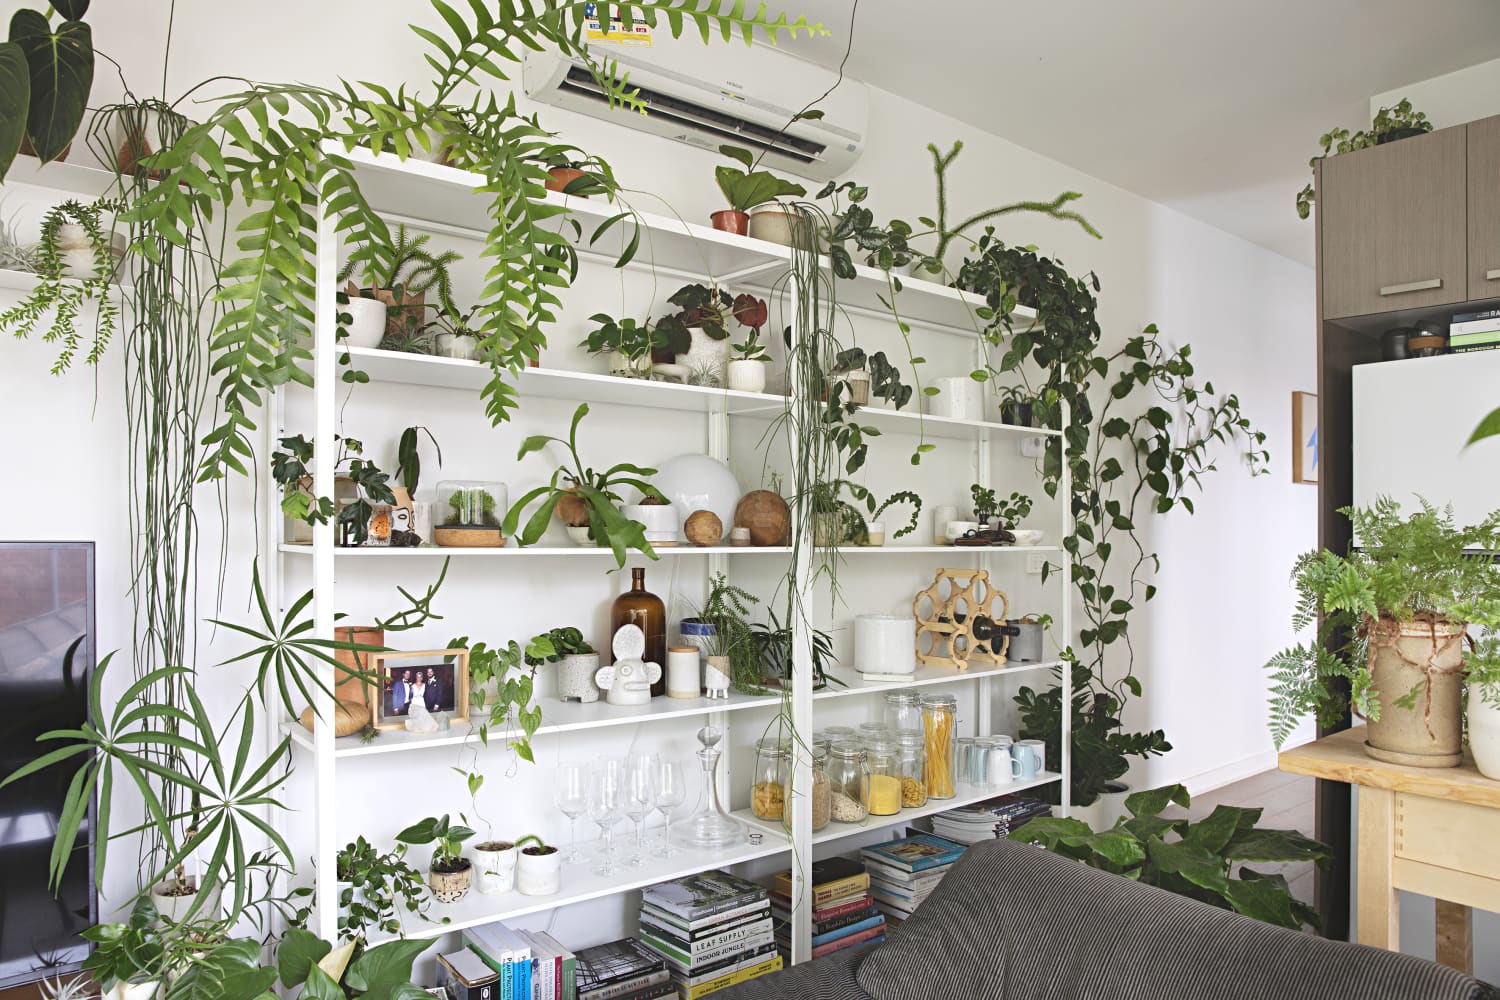 The Benefits of Having Plants in Small Spaces